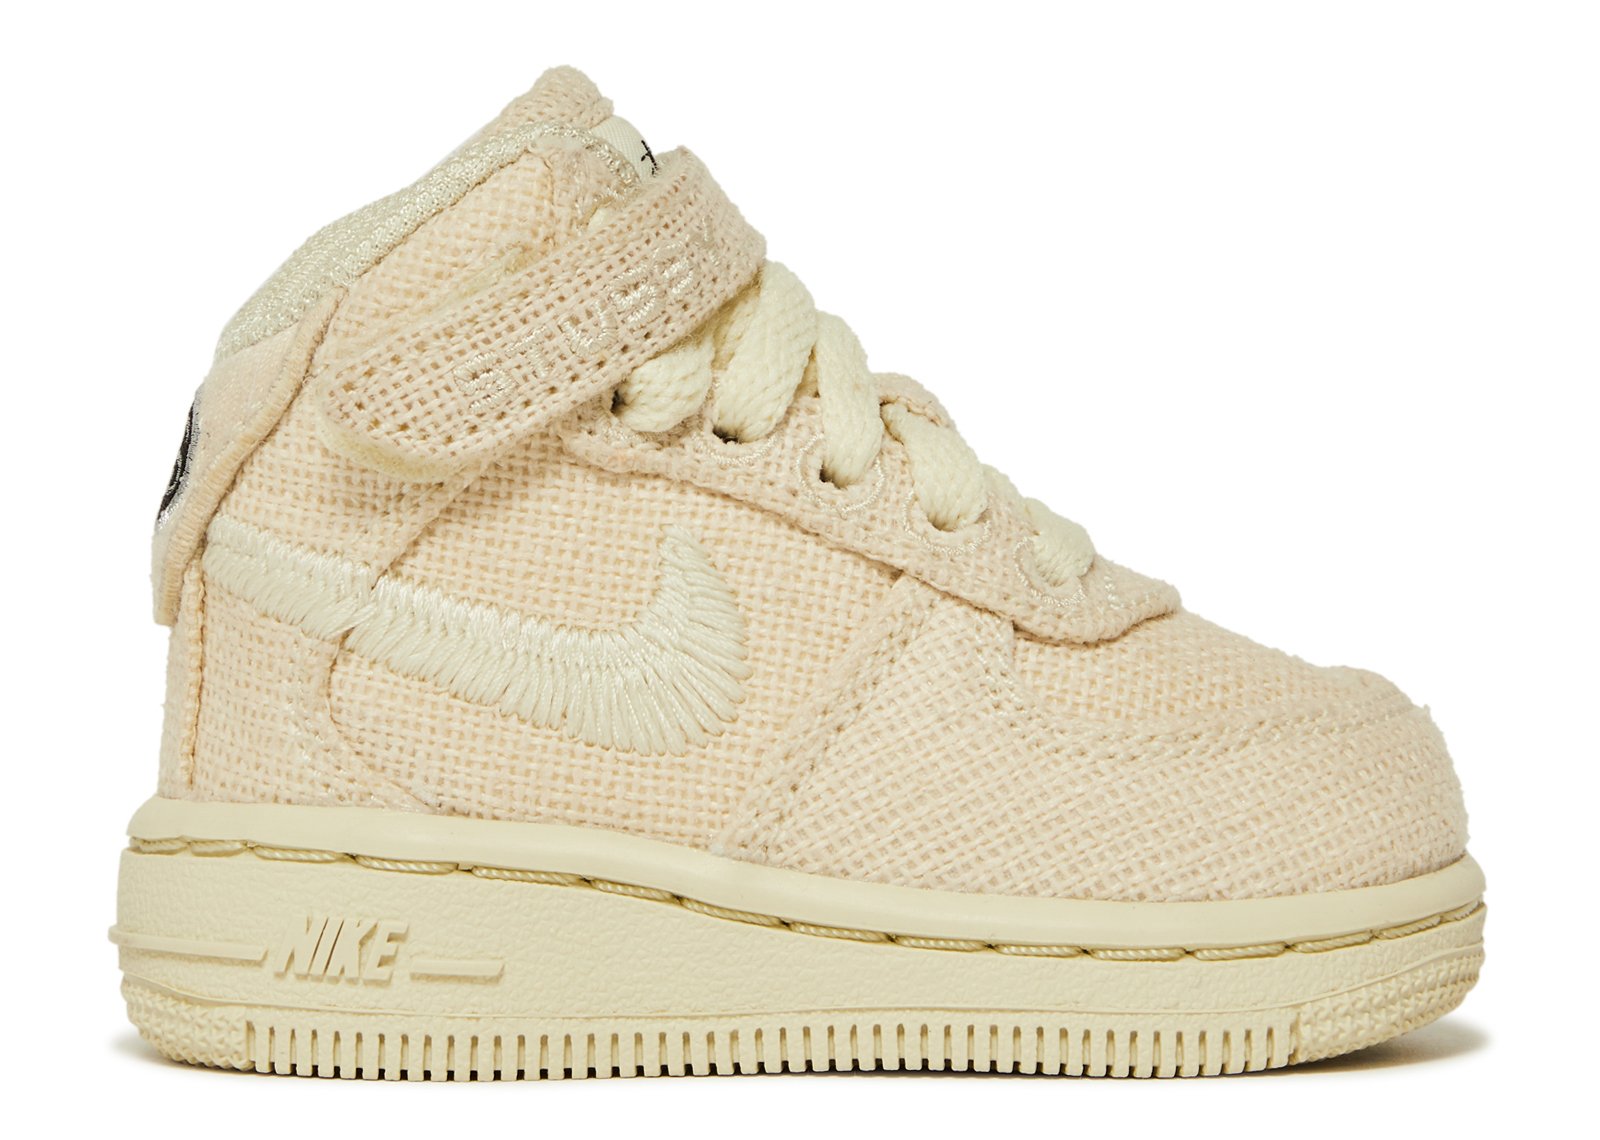 Buy Stussy x Air Force 1 Mid TD 'Fossil' - DN4159 200 | GOAT